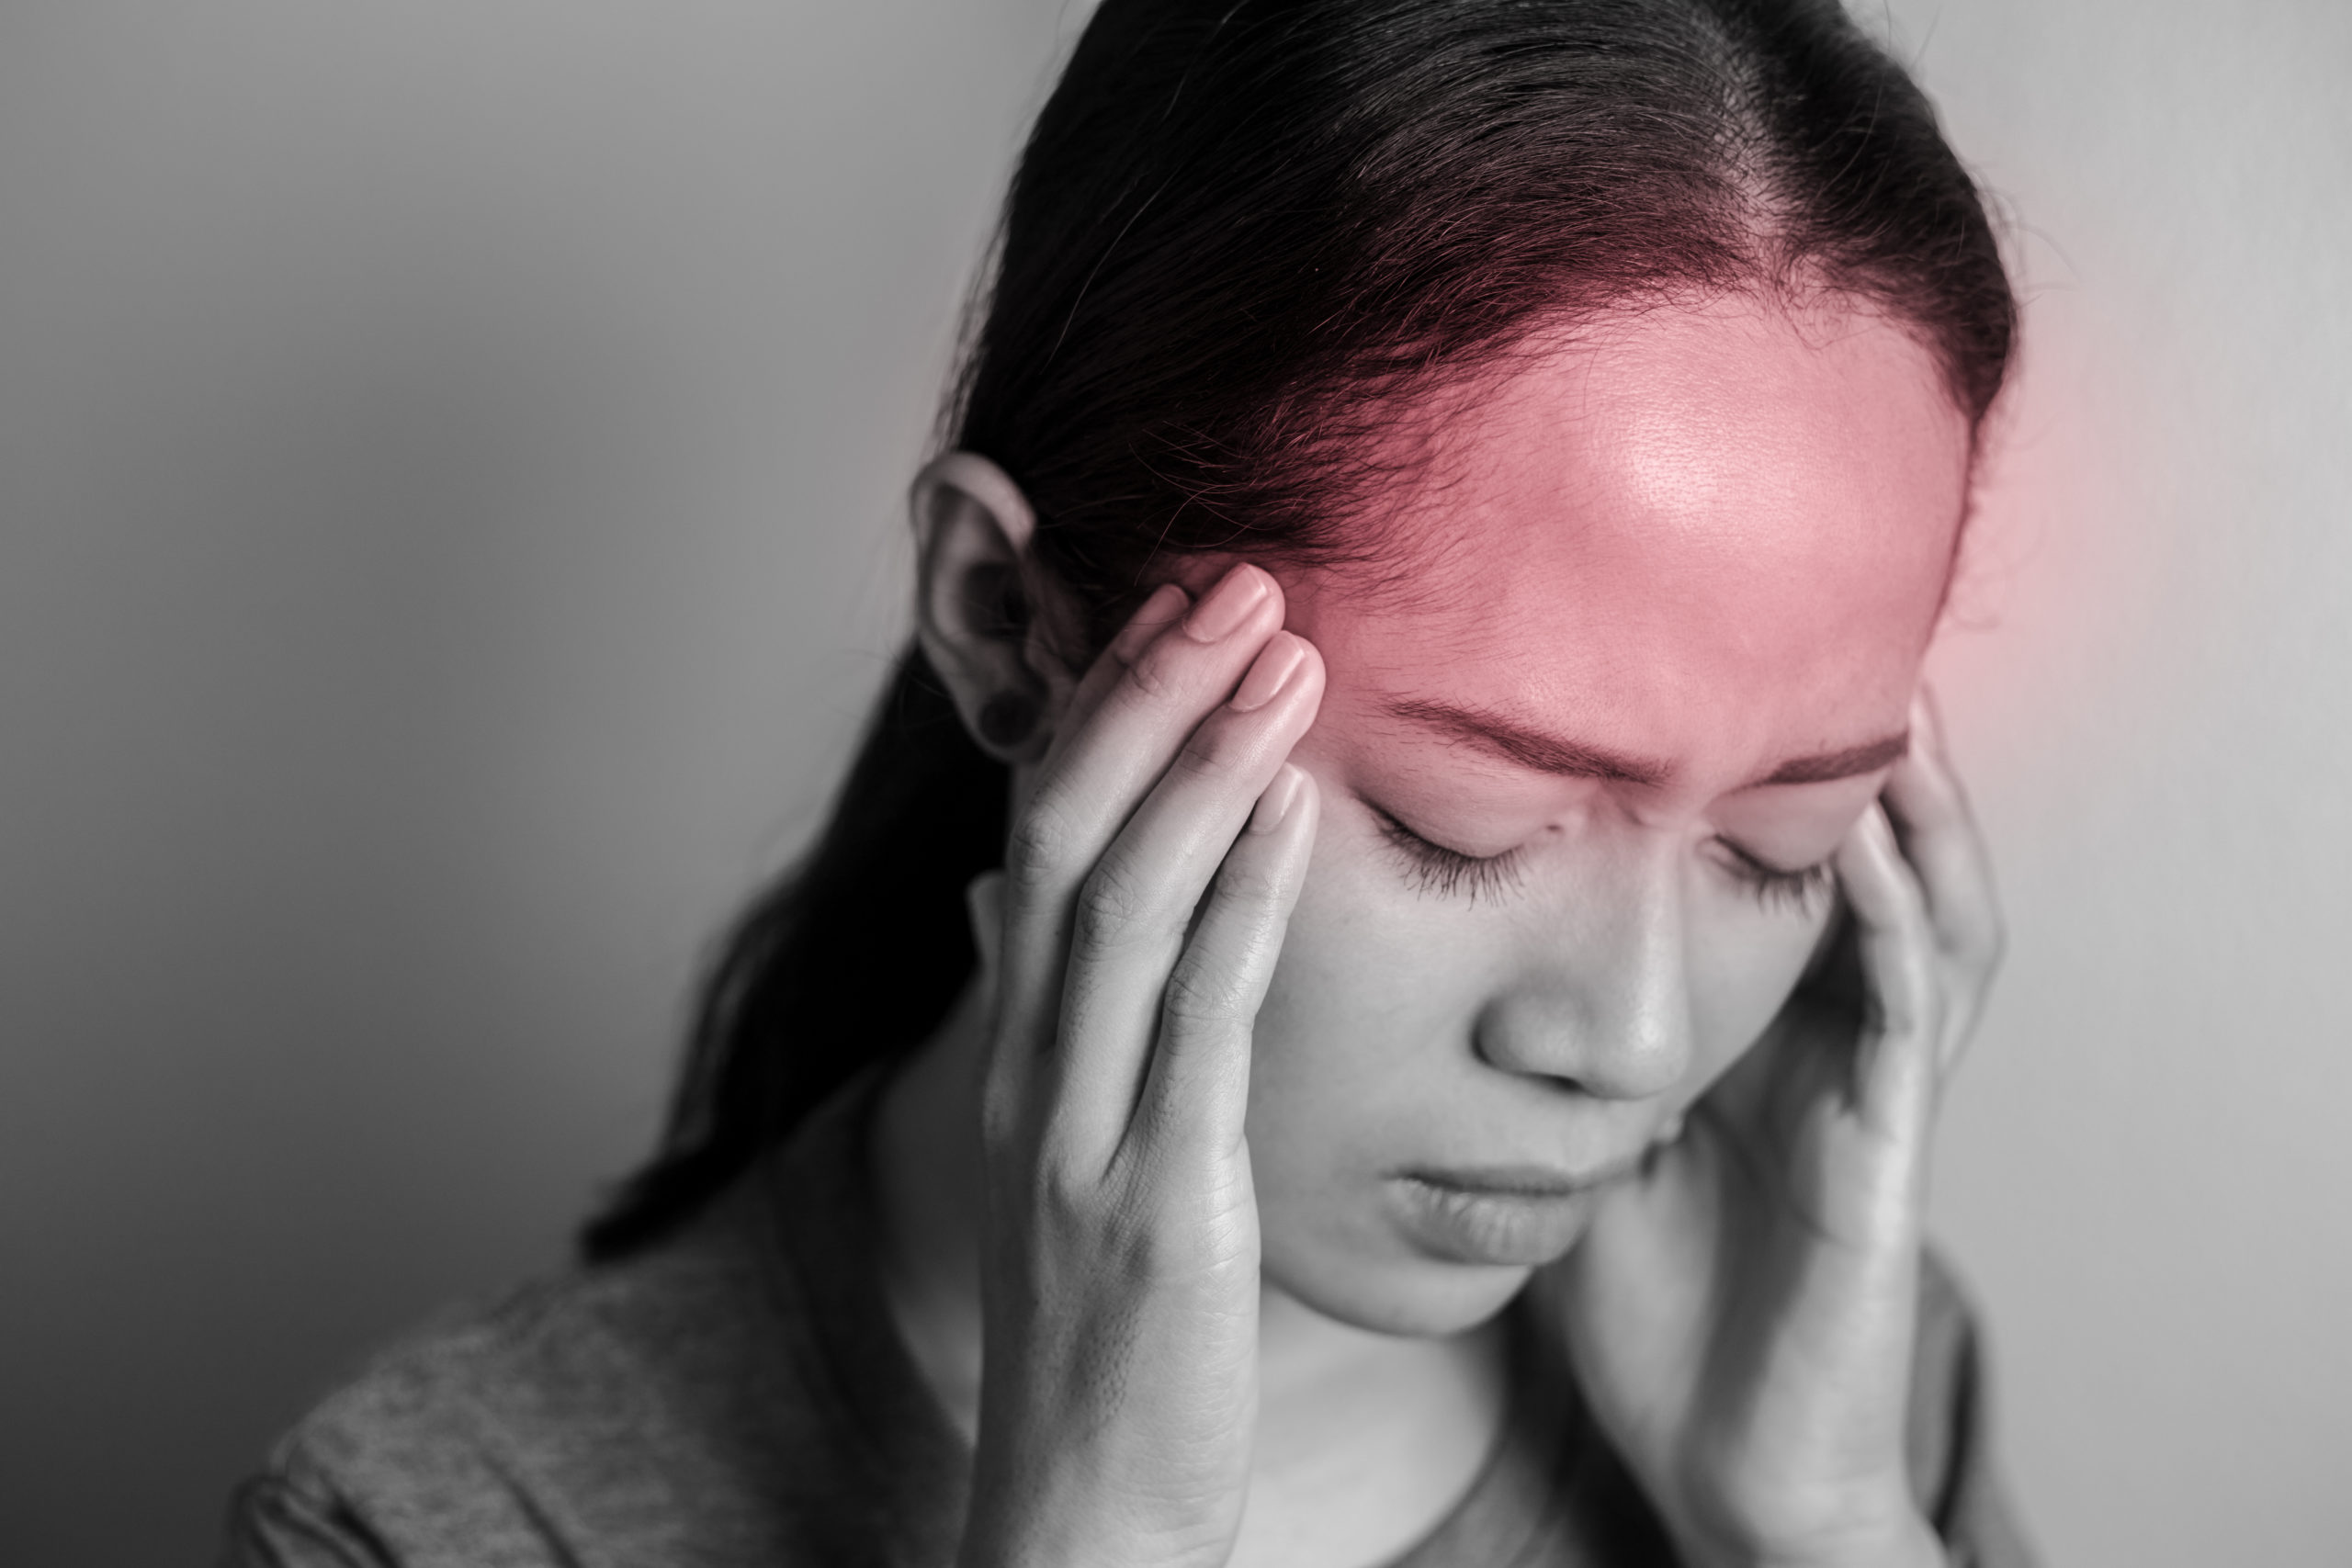 Washington DC Car Accident Lawyers at the Law Offices of Duane O. King Help Clients Experiencing Migraine Headaches after Their Accident.